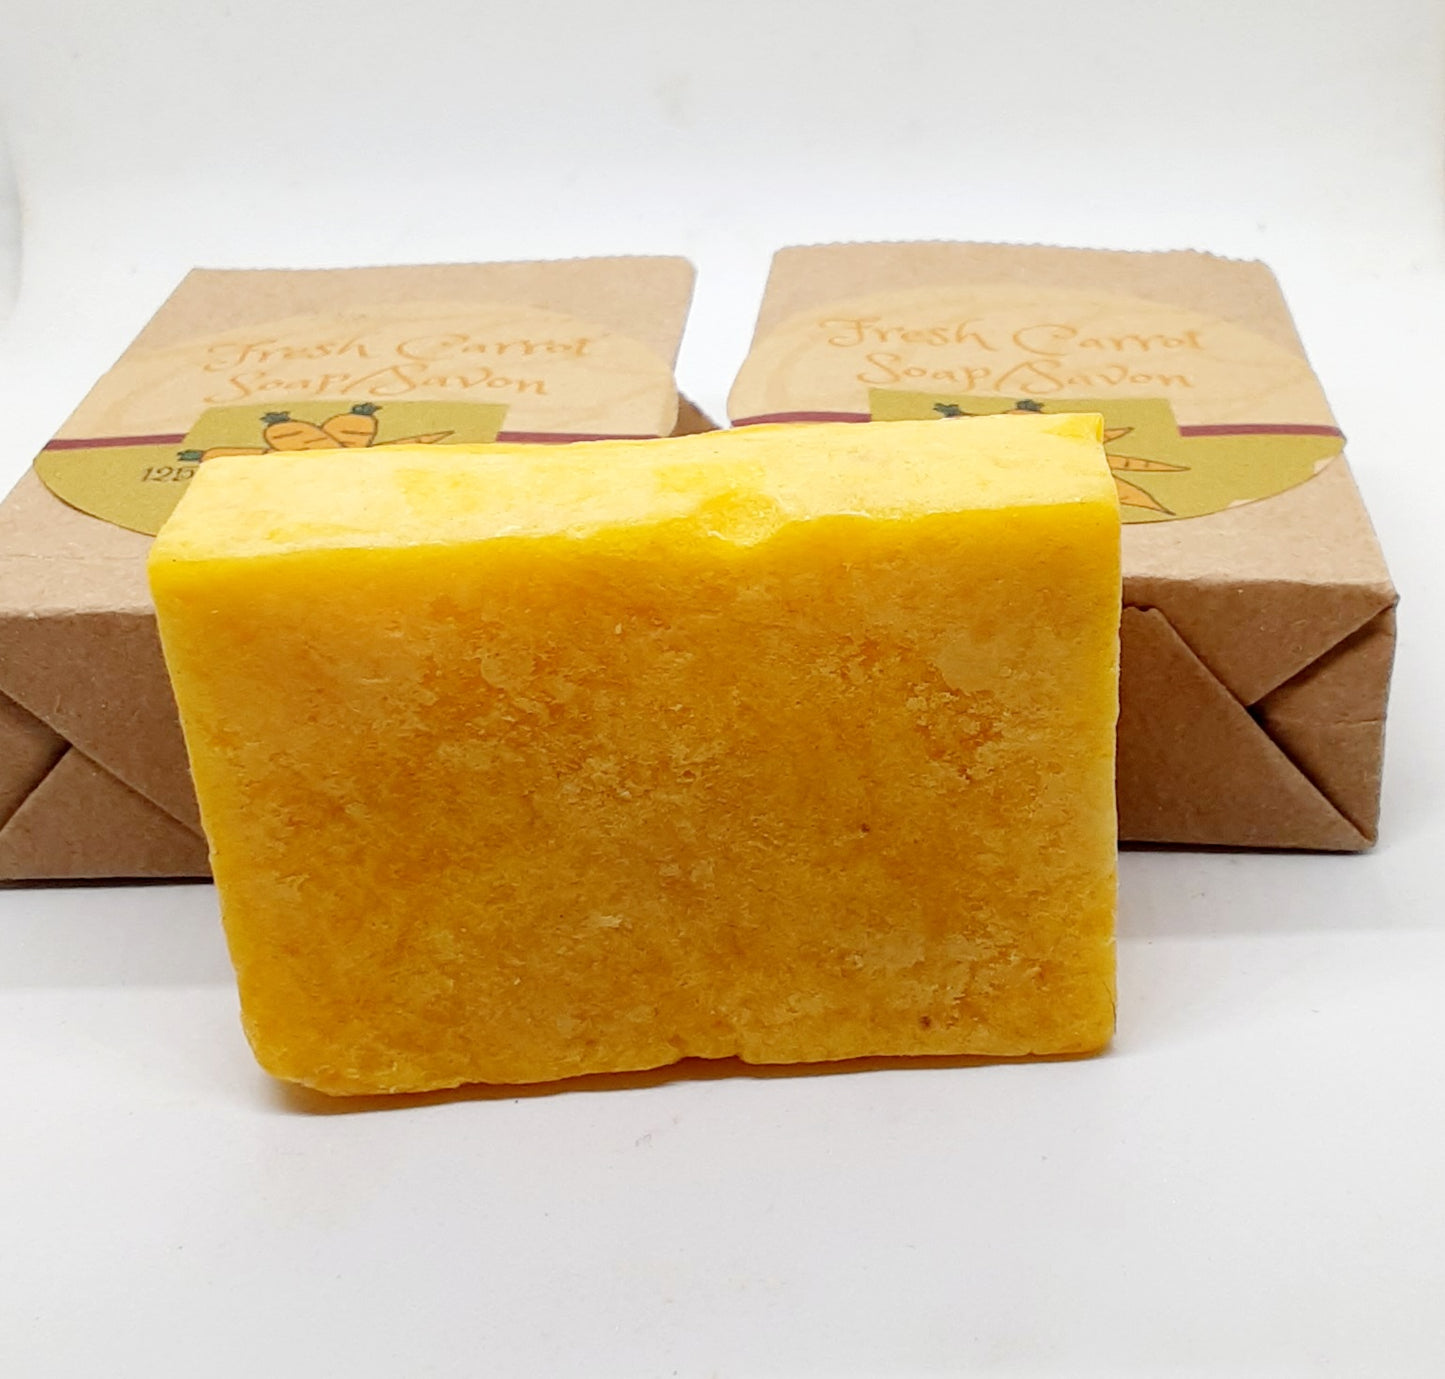 Hand Milled Market Fresh Carrot Soap Made with Real Carrots - Mature Skin Friendly!